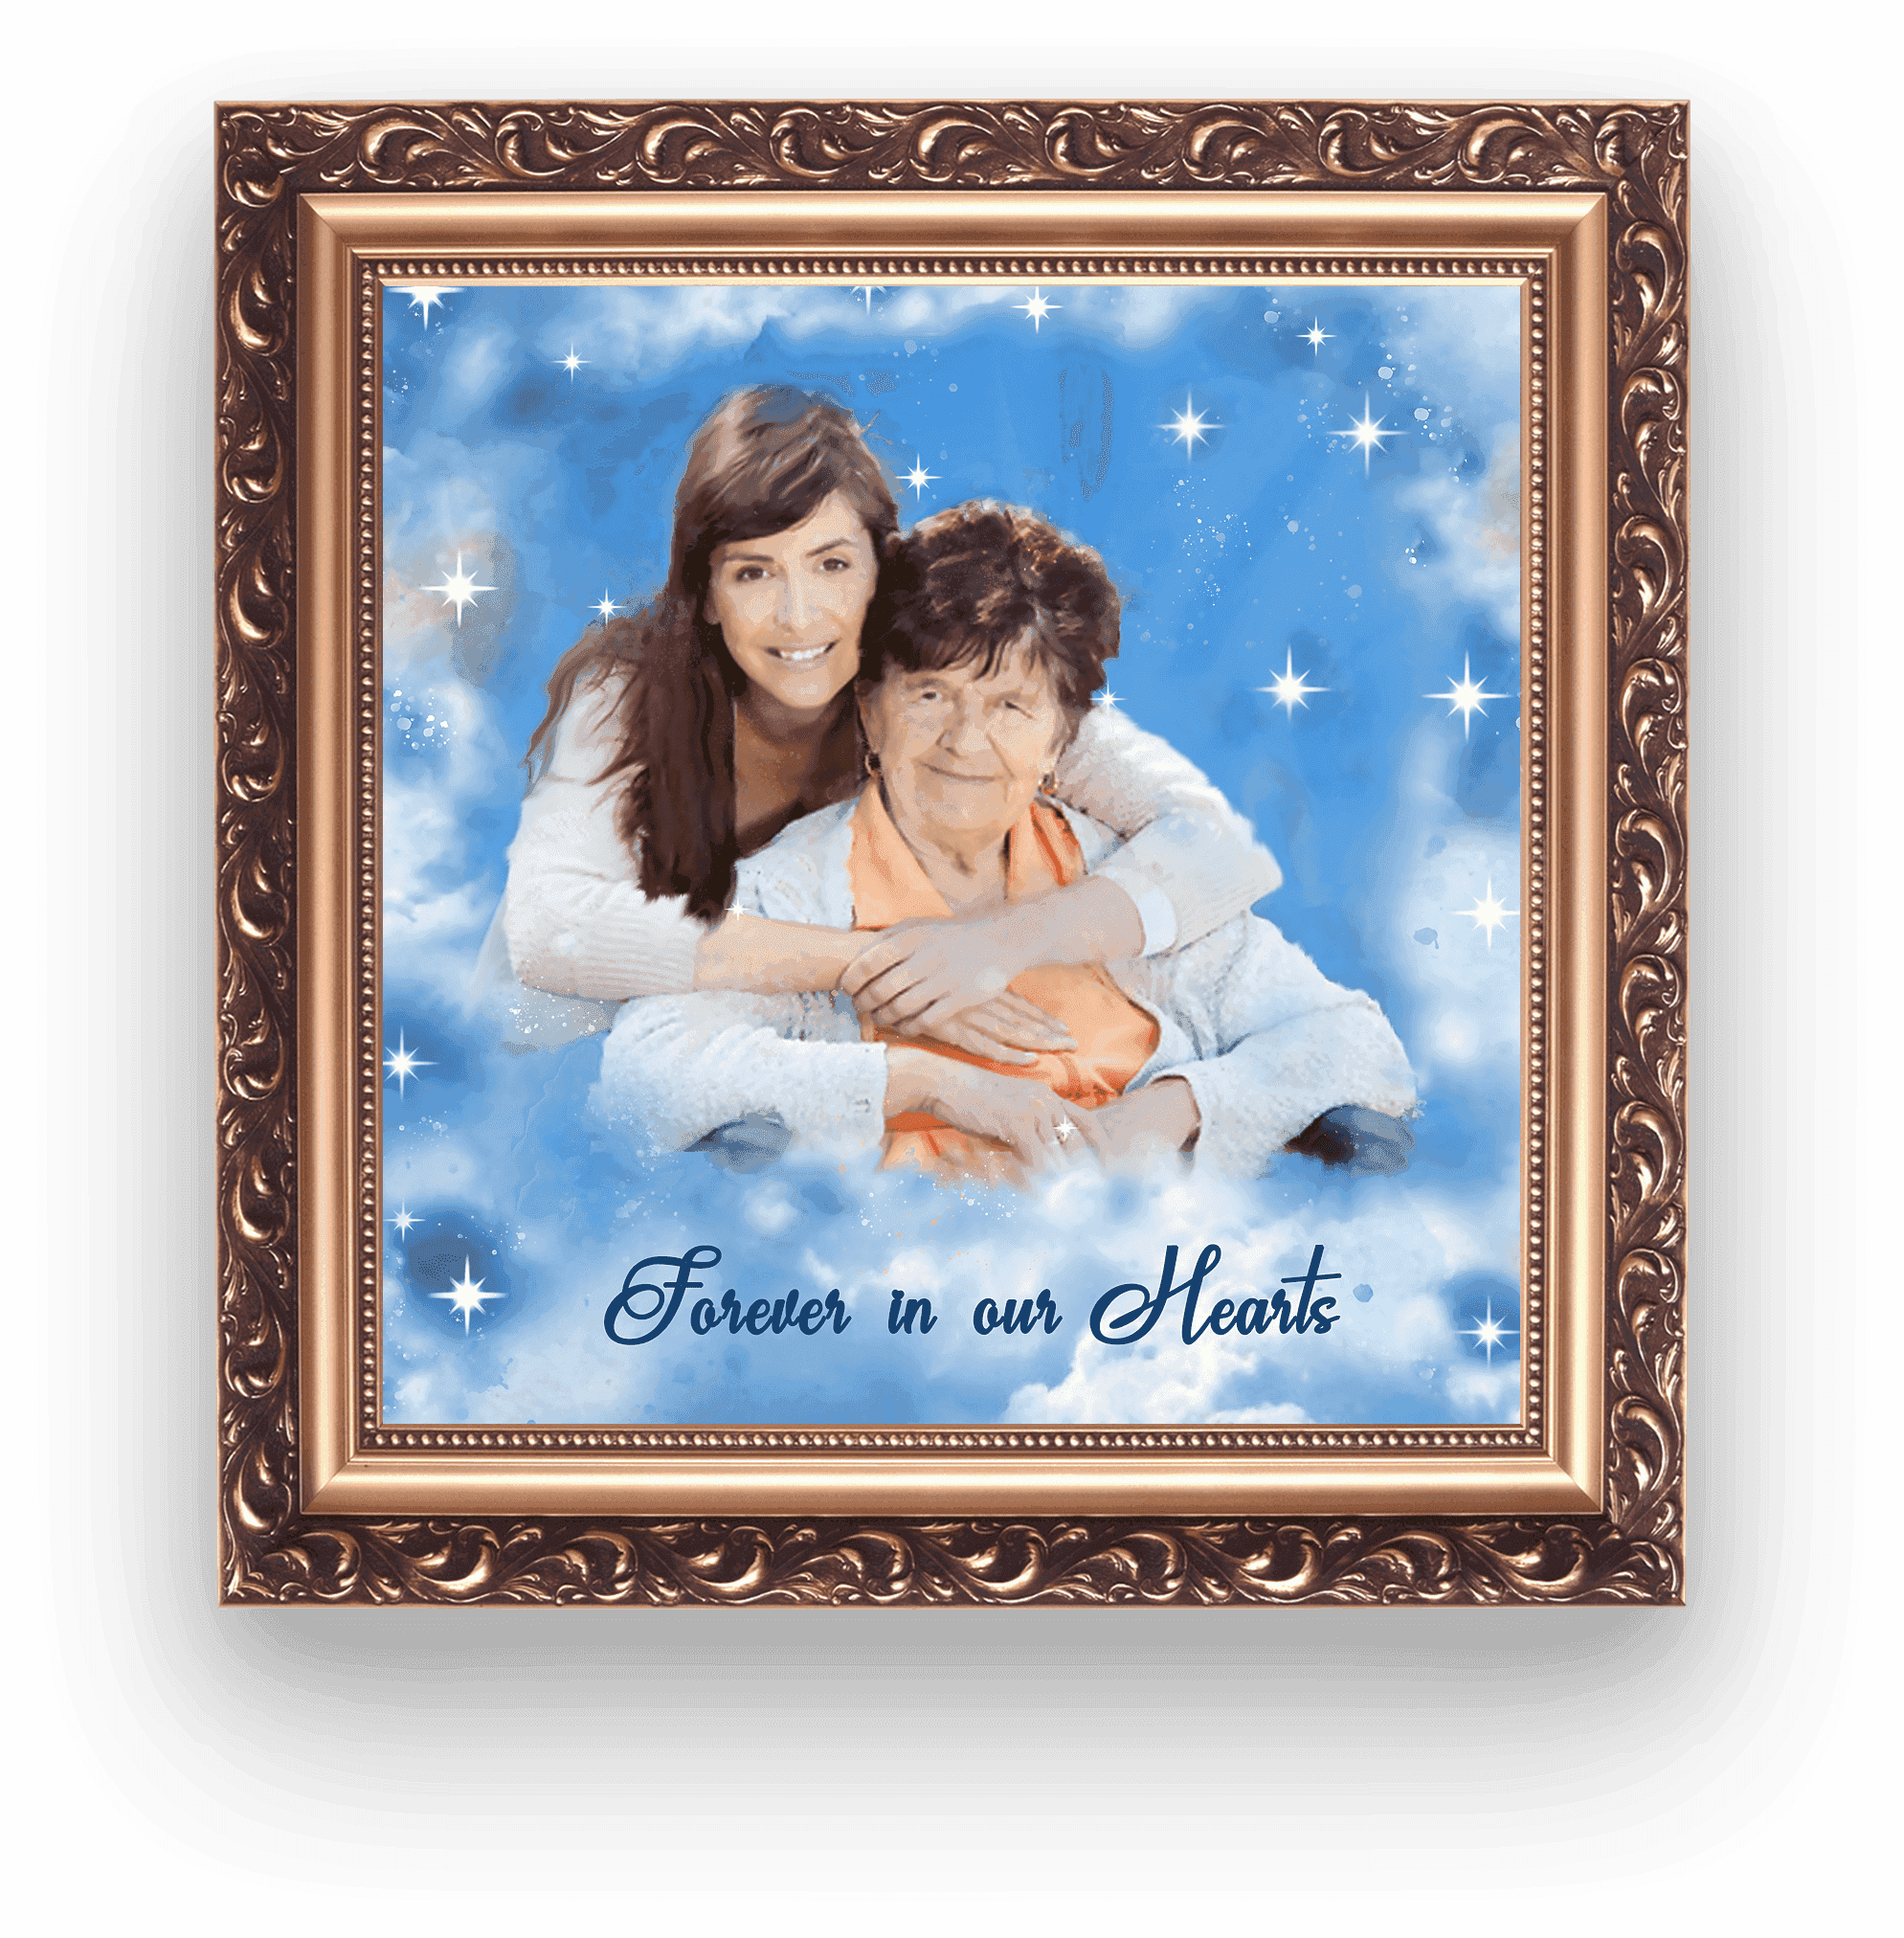 Hand Painted Portraits from Photos, Custom Family Paintings - FromPicToArt